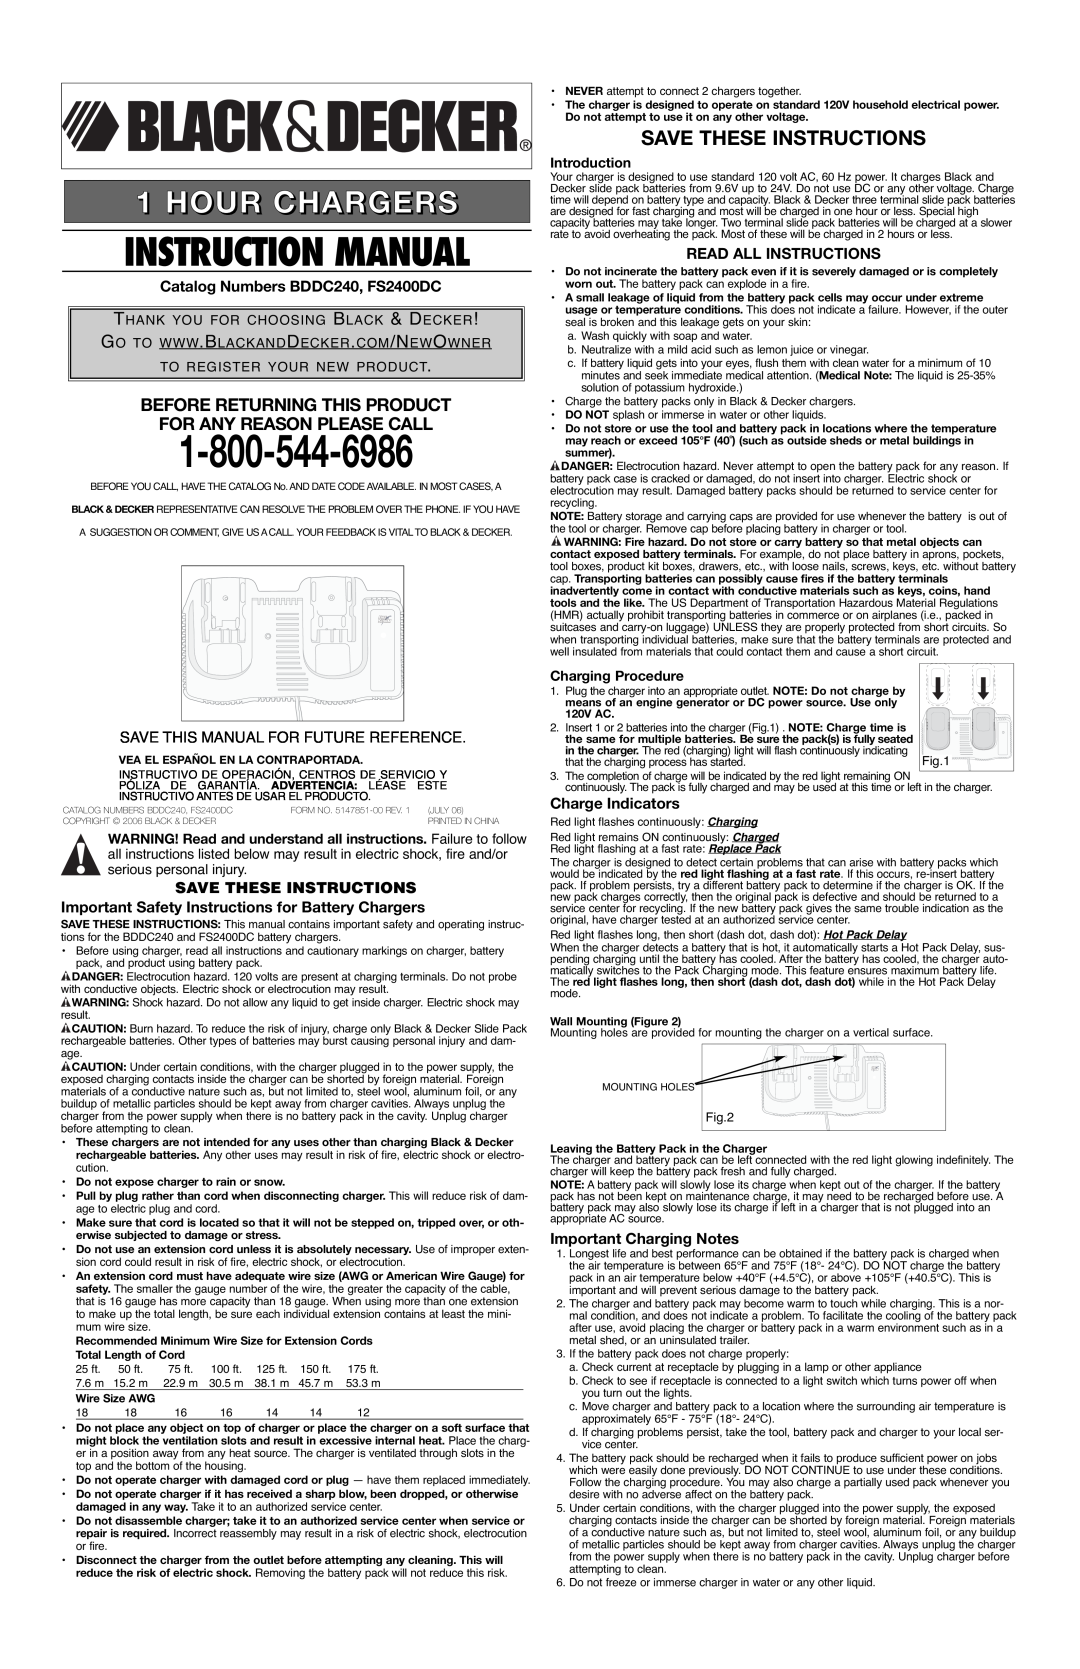 Black & Decker instruction manual Save These Instructions, Catalog Numbers BDDC240, FS2400DC, Read All Instructions 